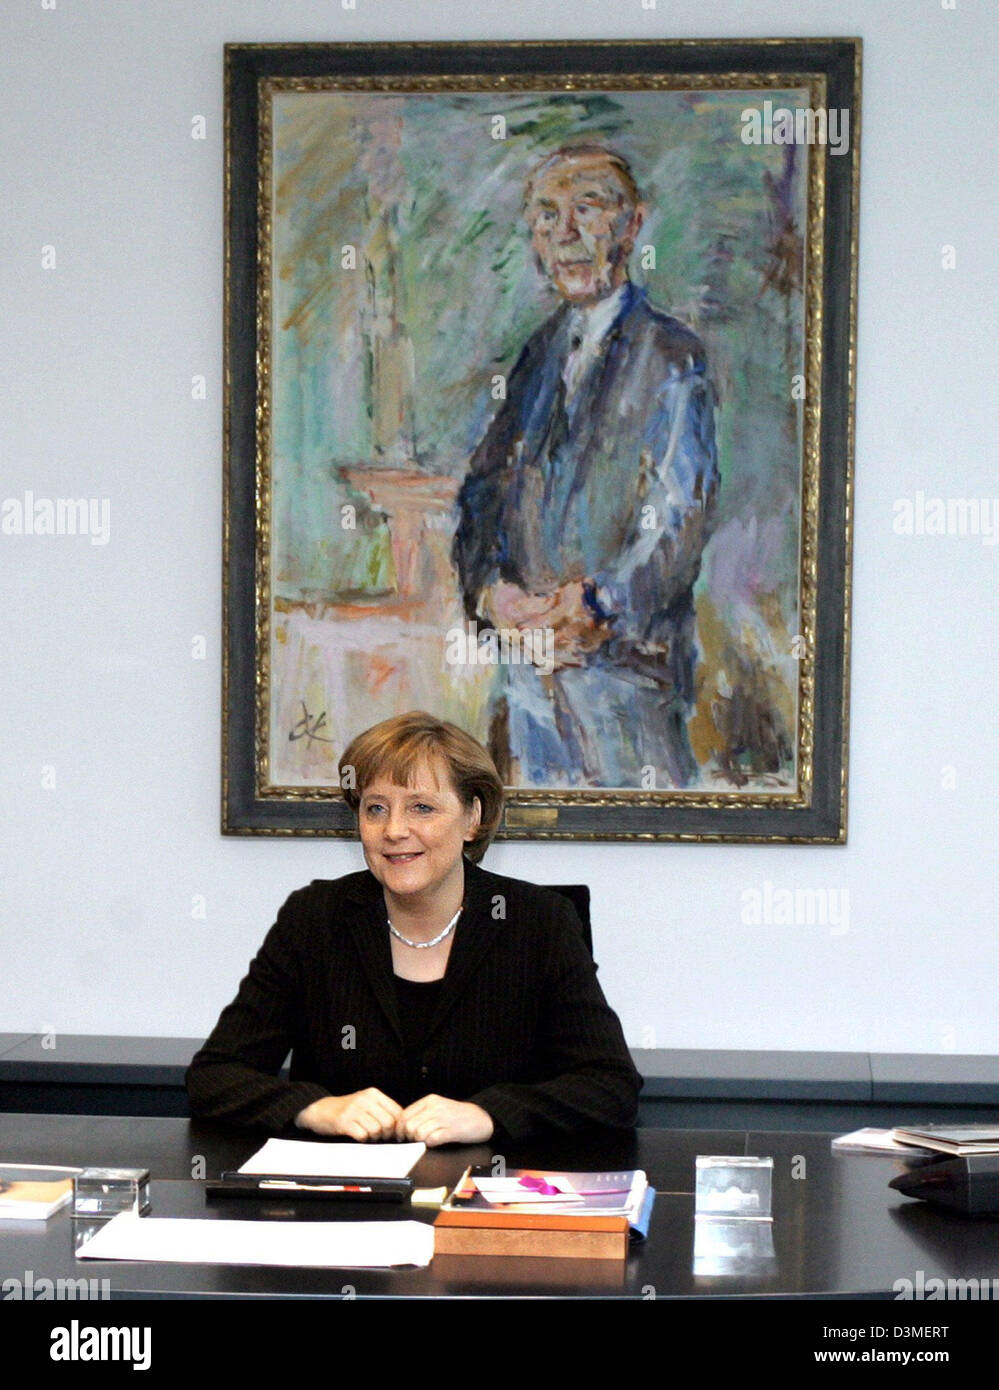 German Chancellor Angela Merkel of the Christian Democrats (CDU) sits hat her desk in front of a painting depicting former German Chancellor Konrad Adenauer (1876-1967) at the chancellery in Berlin, Tuesday, 21 February 2006. The painting by Austrian-born artist Oskar Kokoschka (1886-1980), which was part of a valume of stocks of art work belonging to the Bundestag parliament, was  Stock Photo